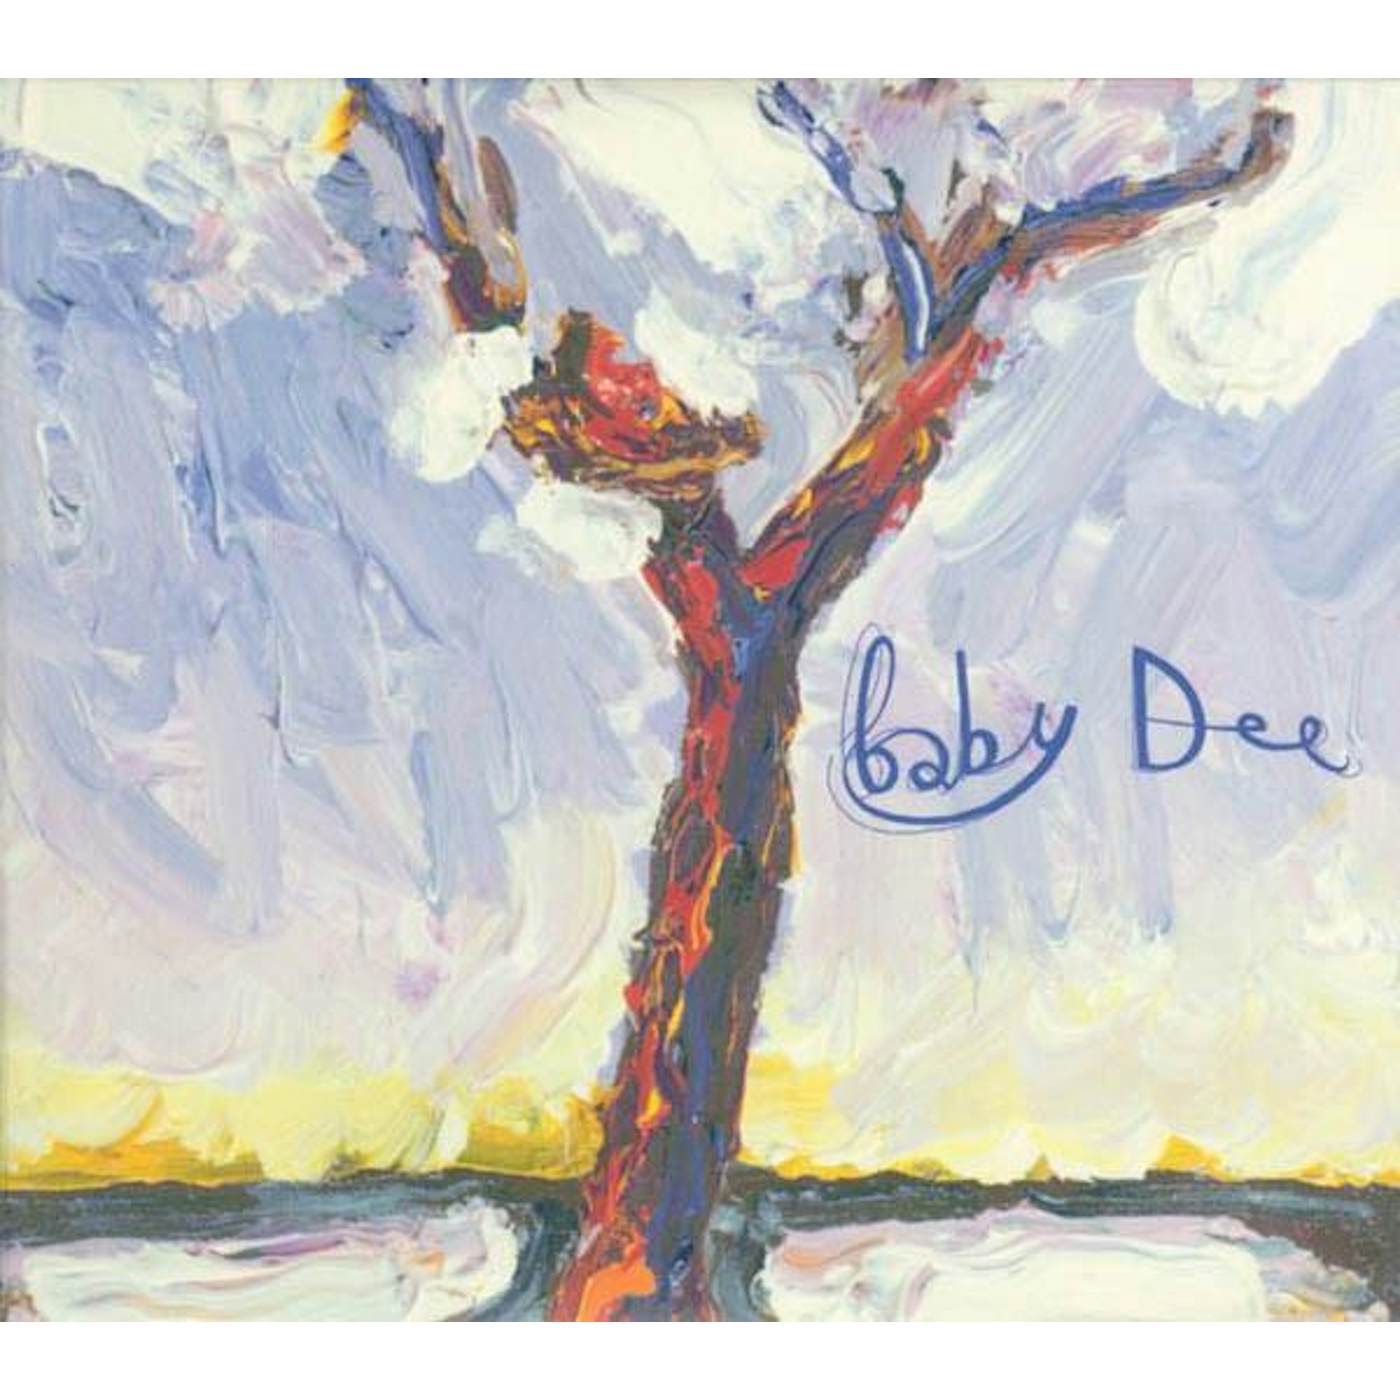 Baby Dee Love's Small Song Vinyl Record